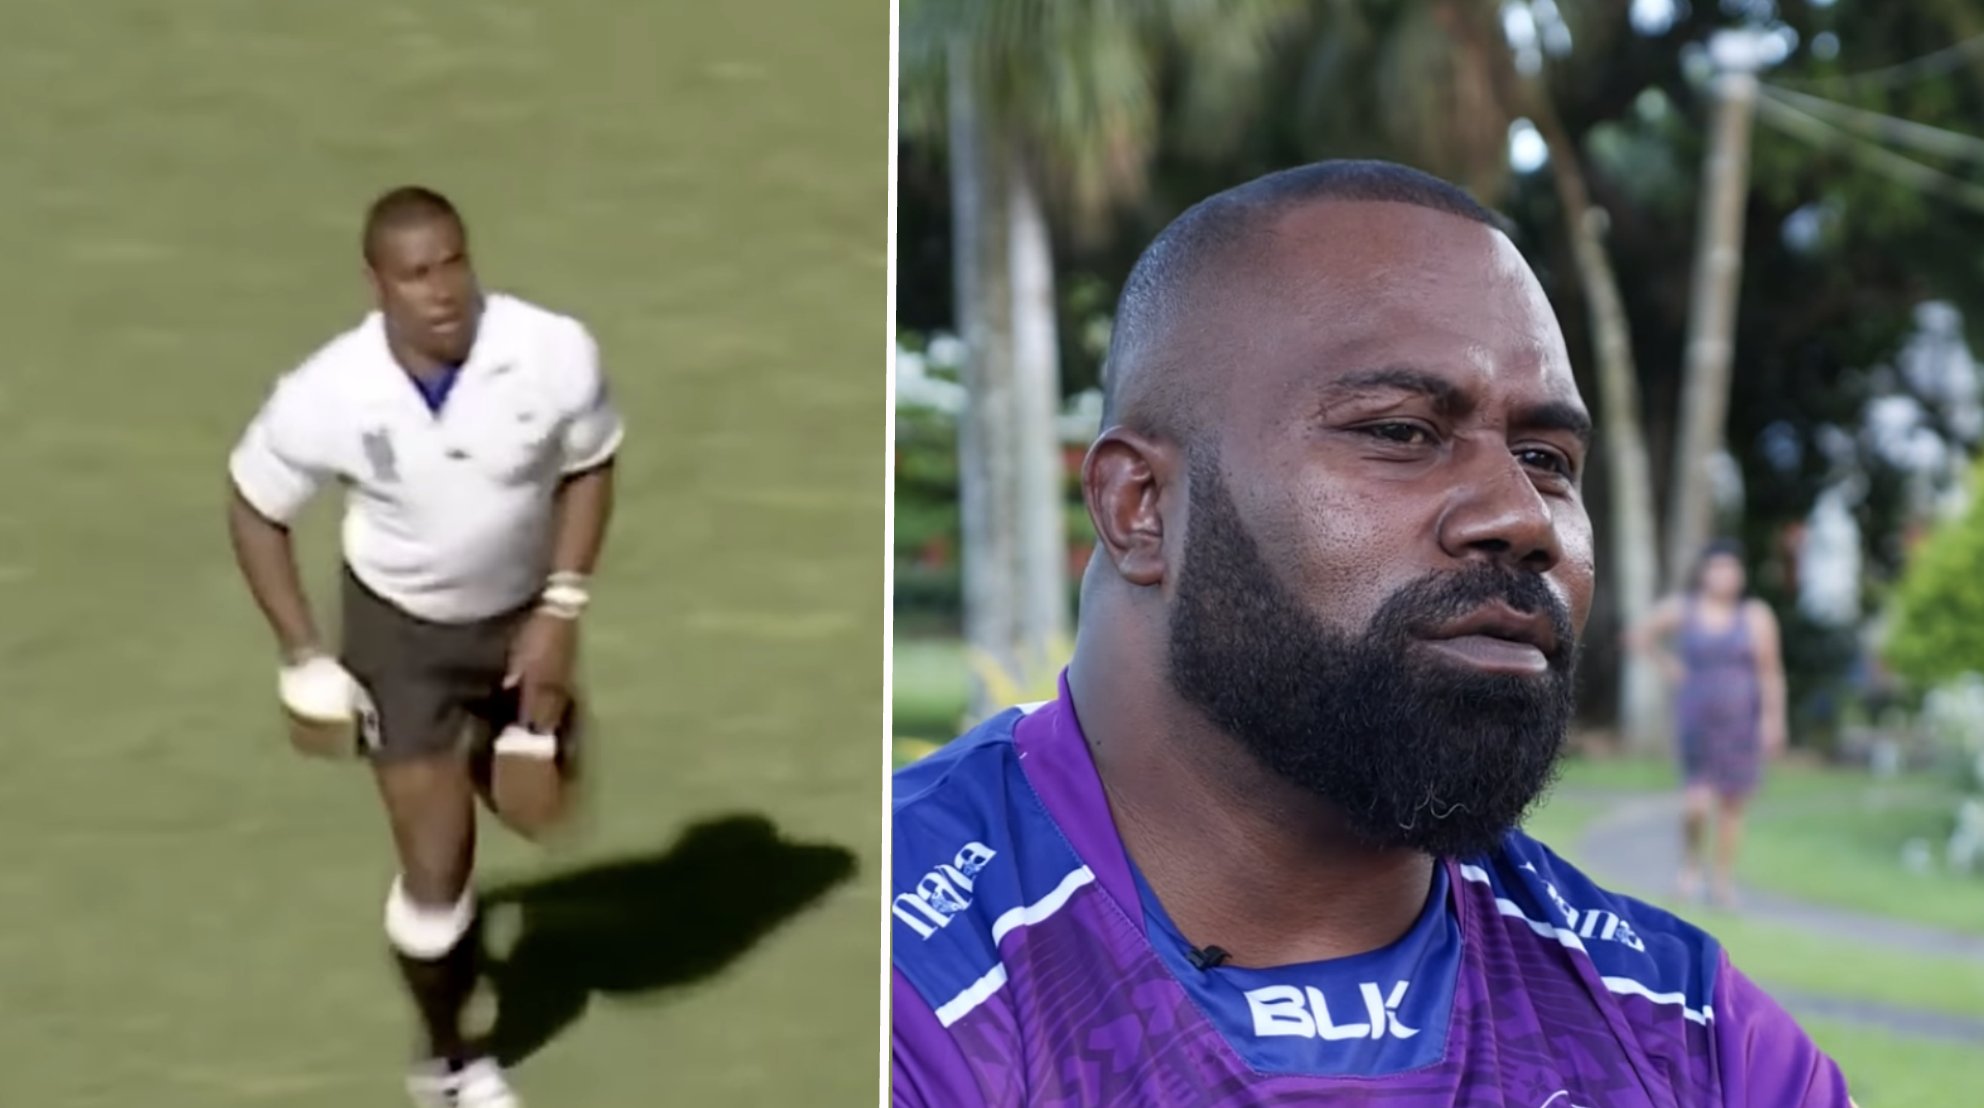 New video highlights the momentous journey of Rupeni Caucaunibuca, one of the best Islanders to ever play rugby